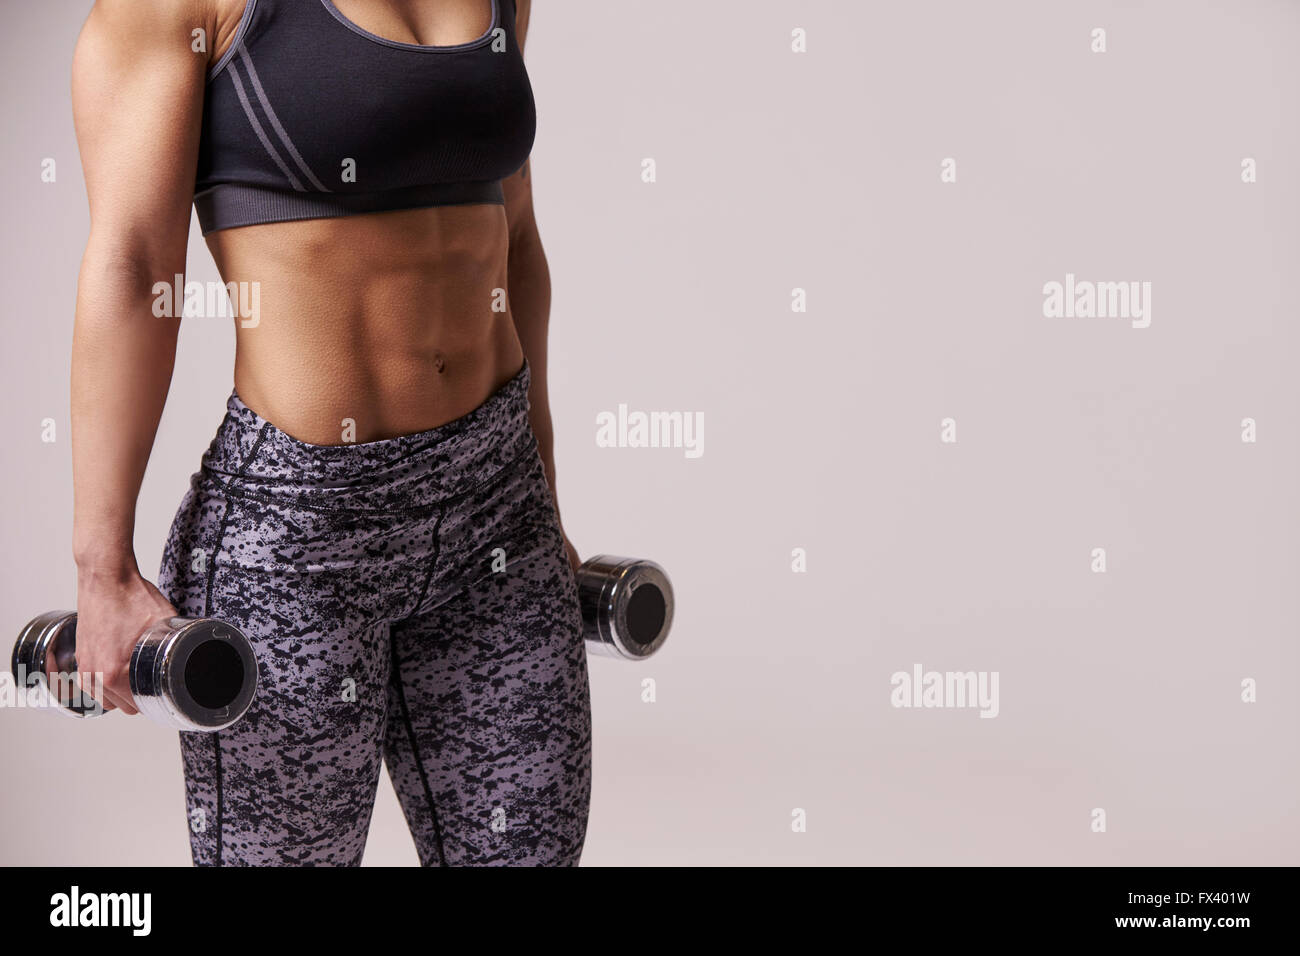 Dark haired young woman using dumbbells, mid section crop Stock Photo